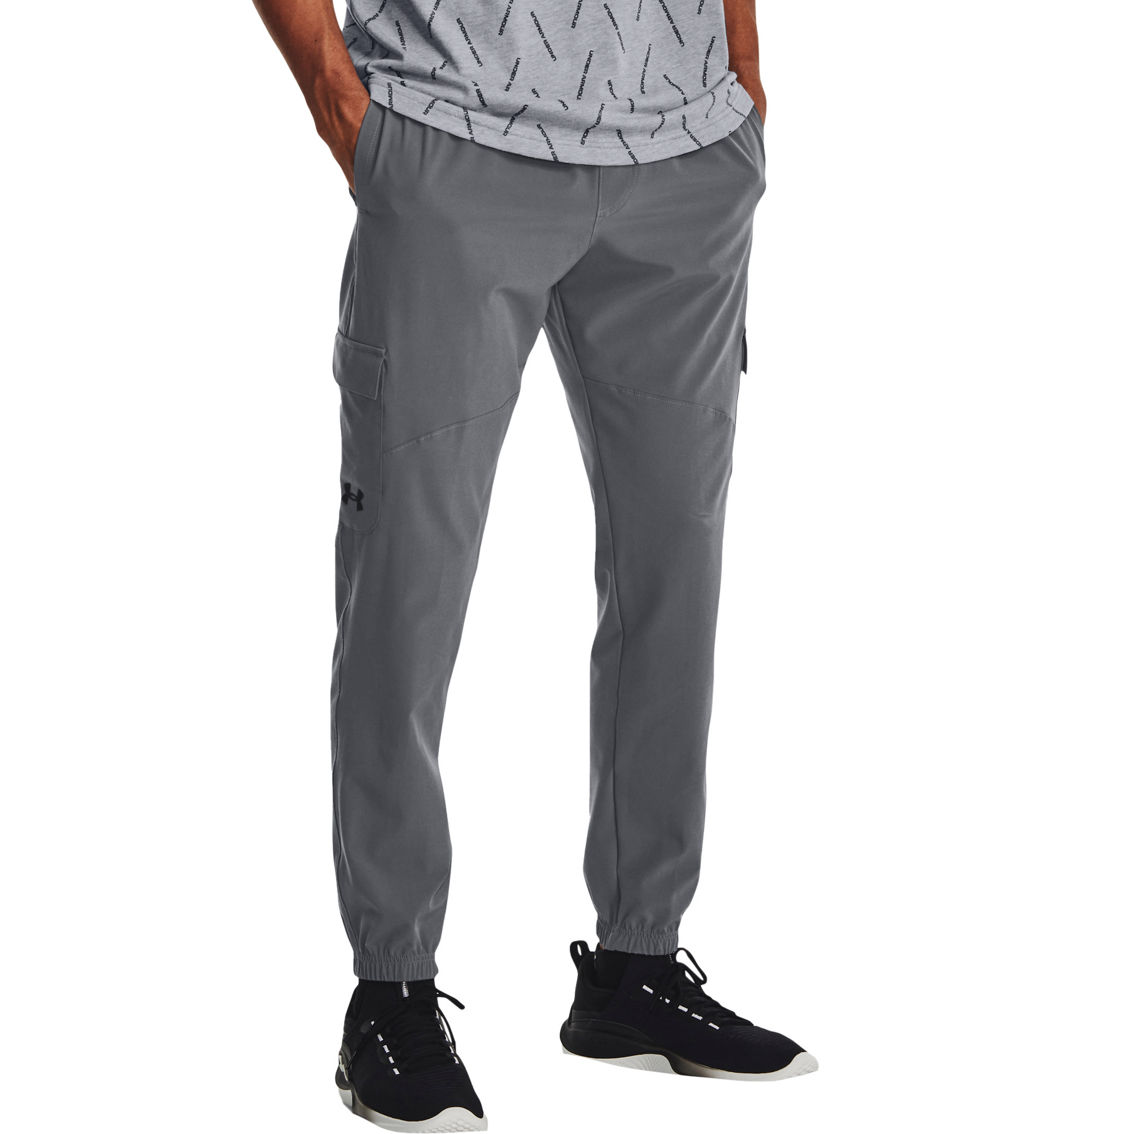 Under Armour Stretch Woven Cargo Pants | Pants | Clothing & Accessories ...